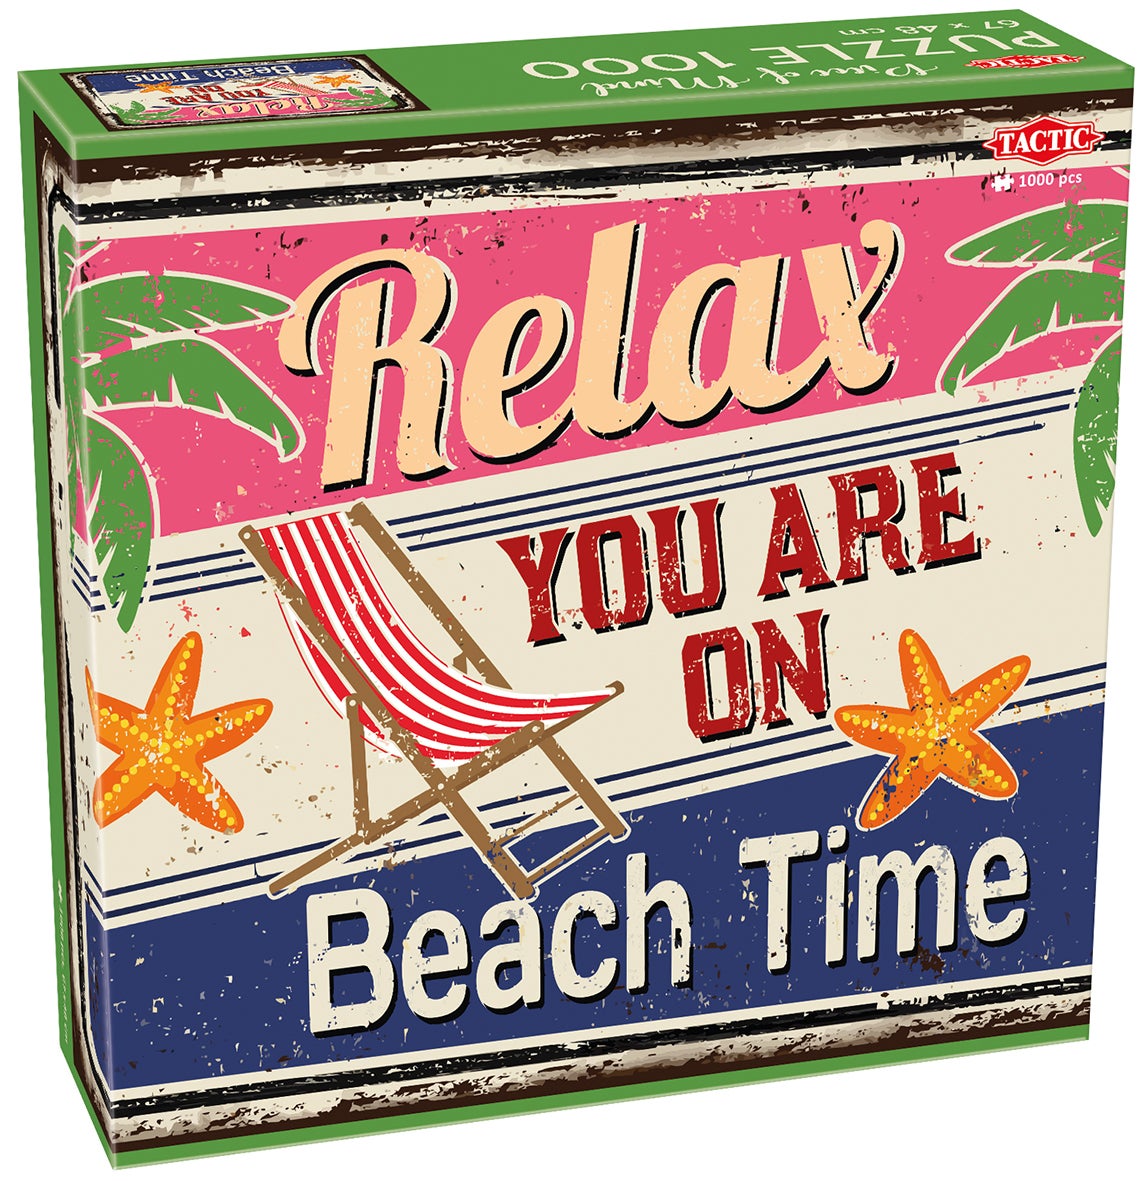 Puslespill 1000 B Relax Beachtime Tactic